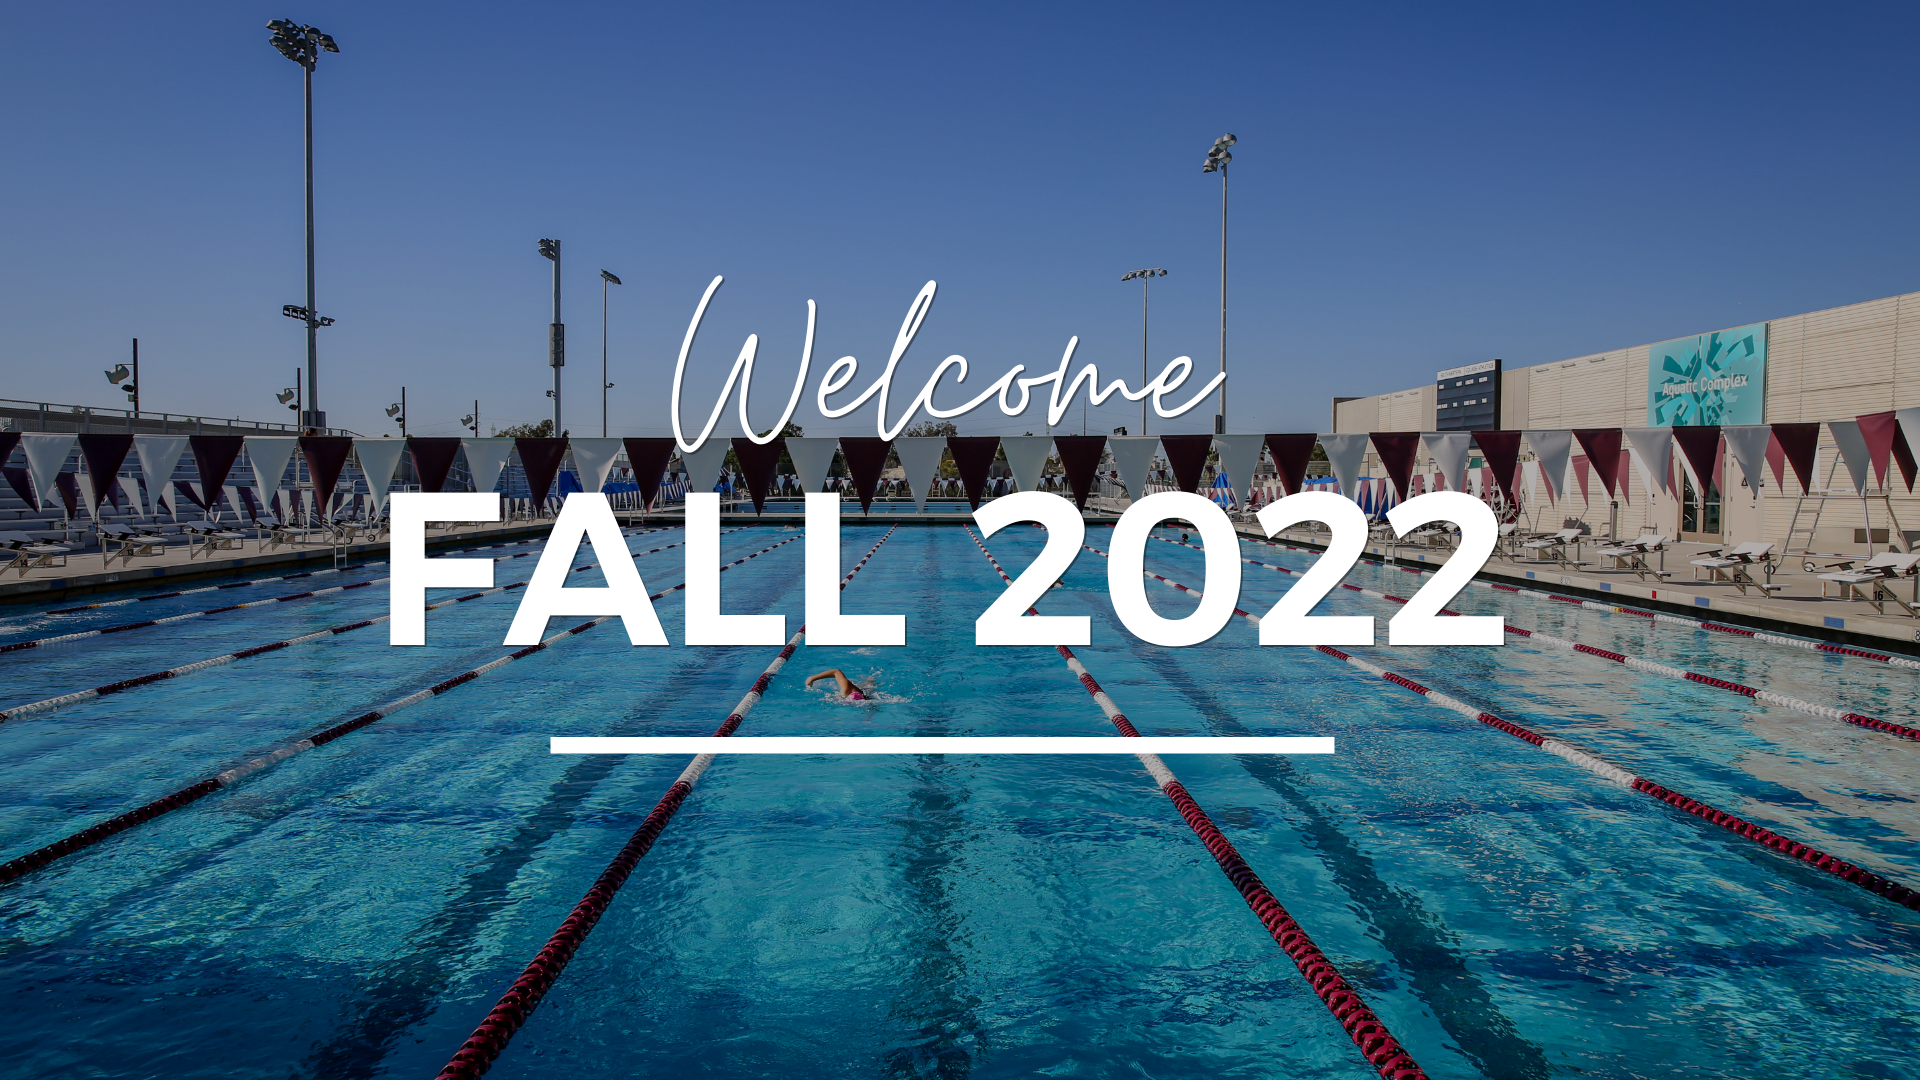 Graphic that says "Welcome Fall 2022"